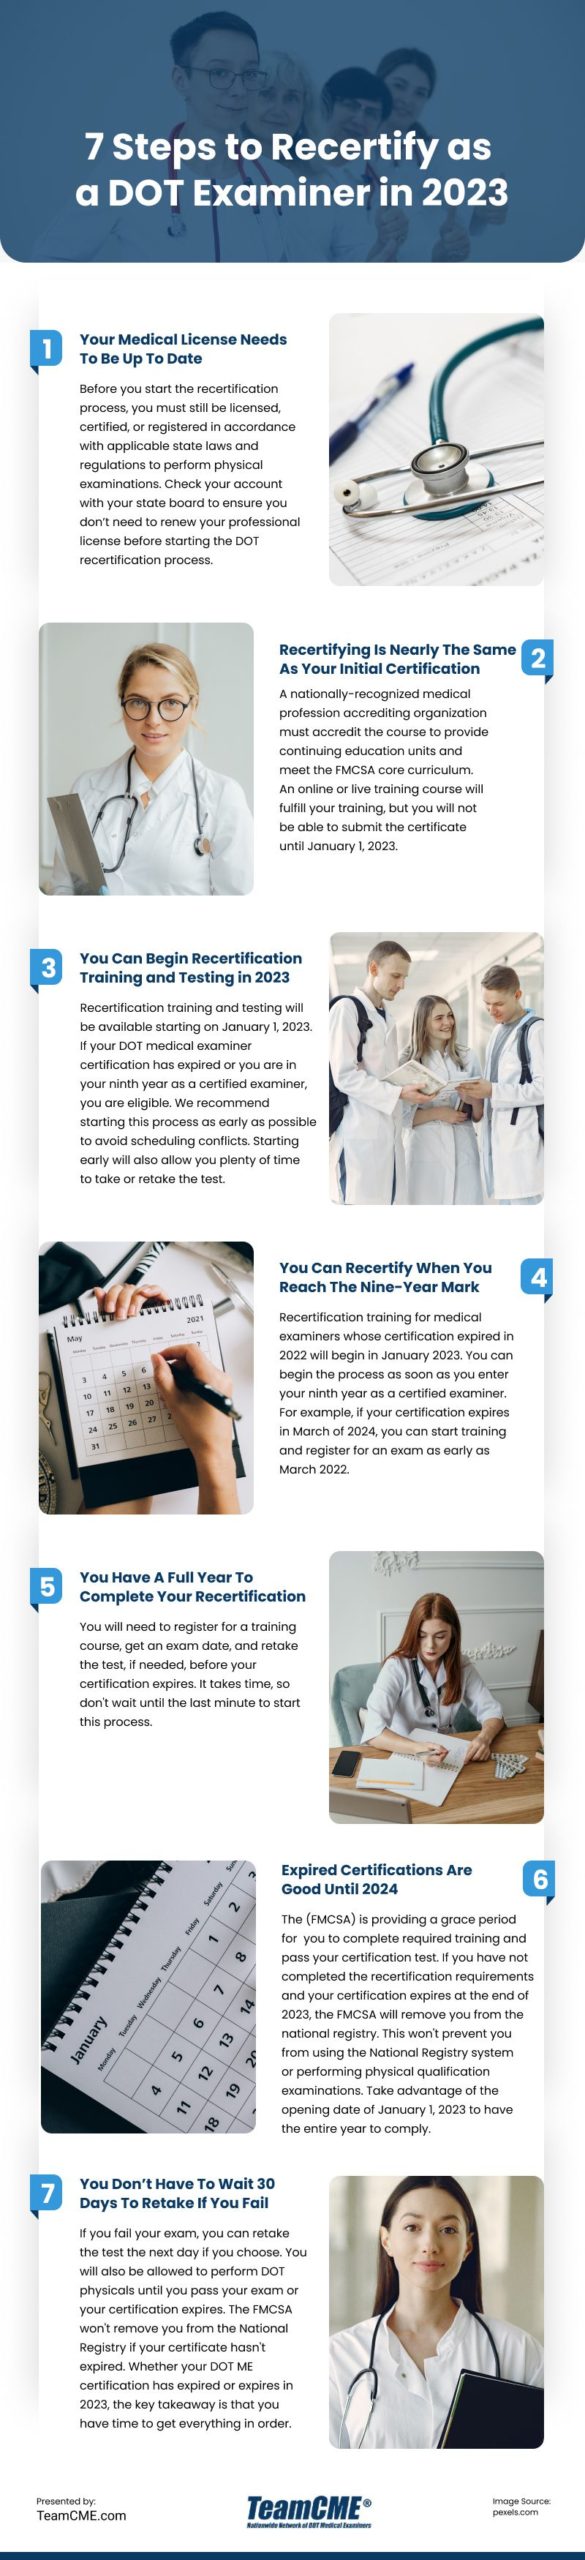 7 Steps to Recertify as a DOT Examiner in 2023 Infographic